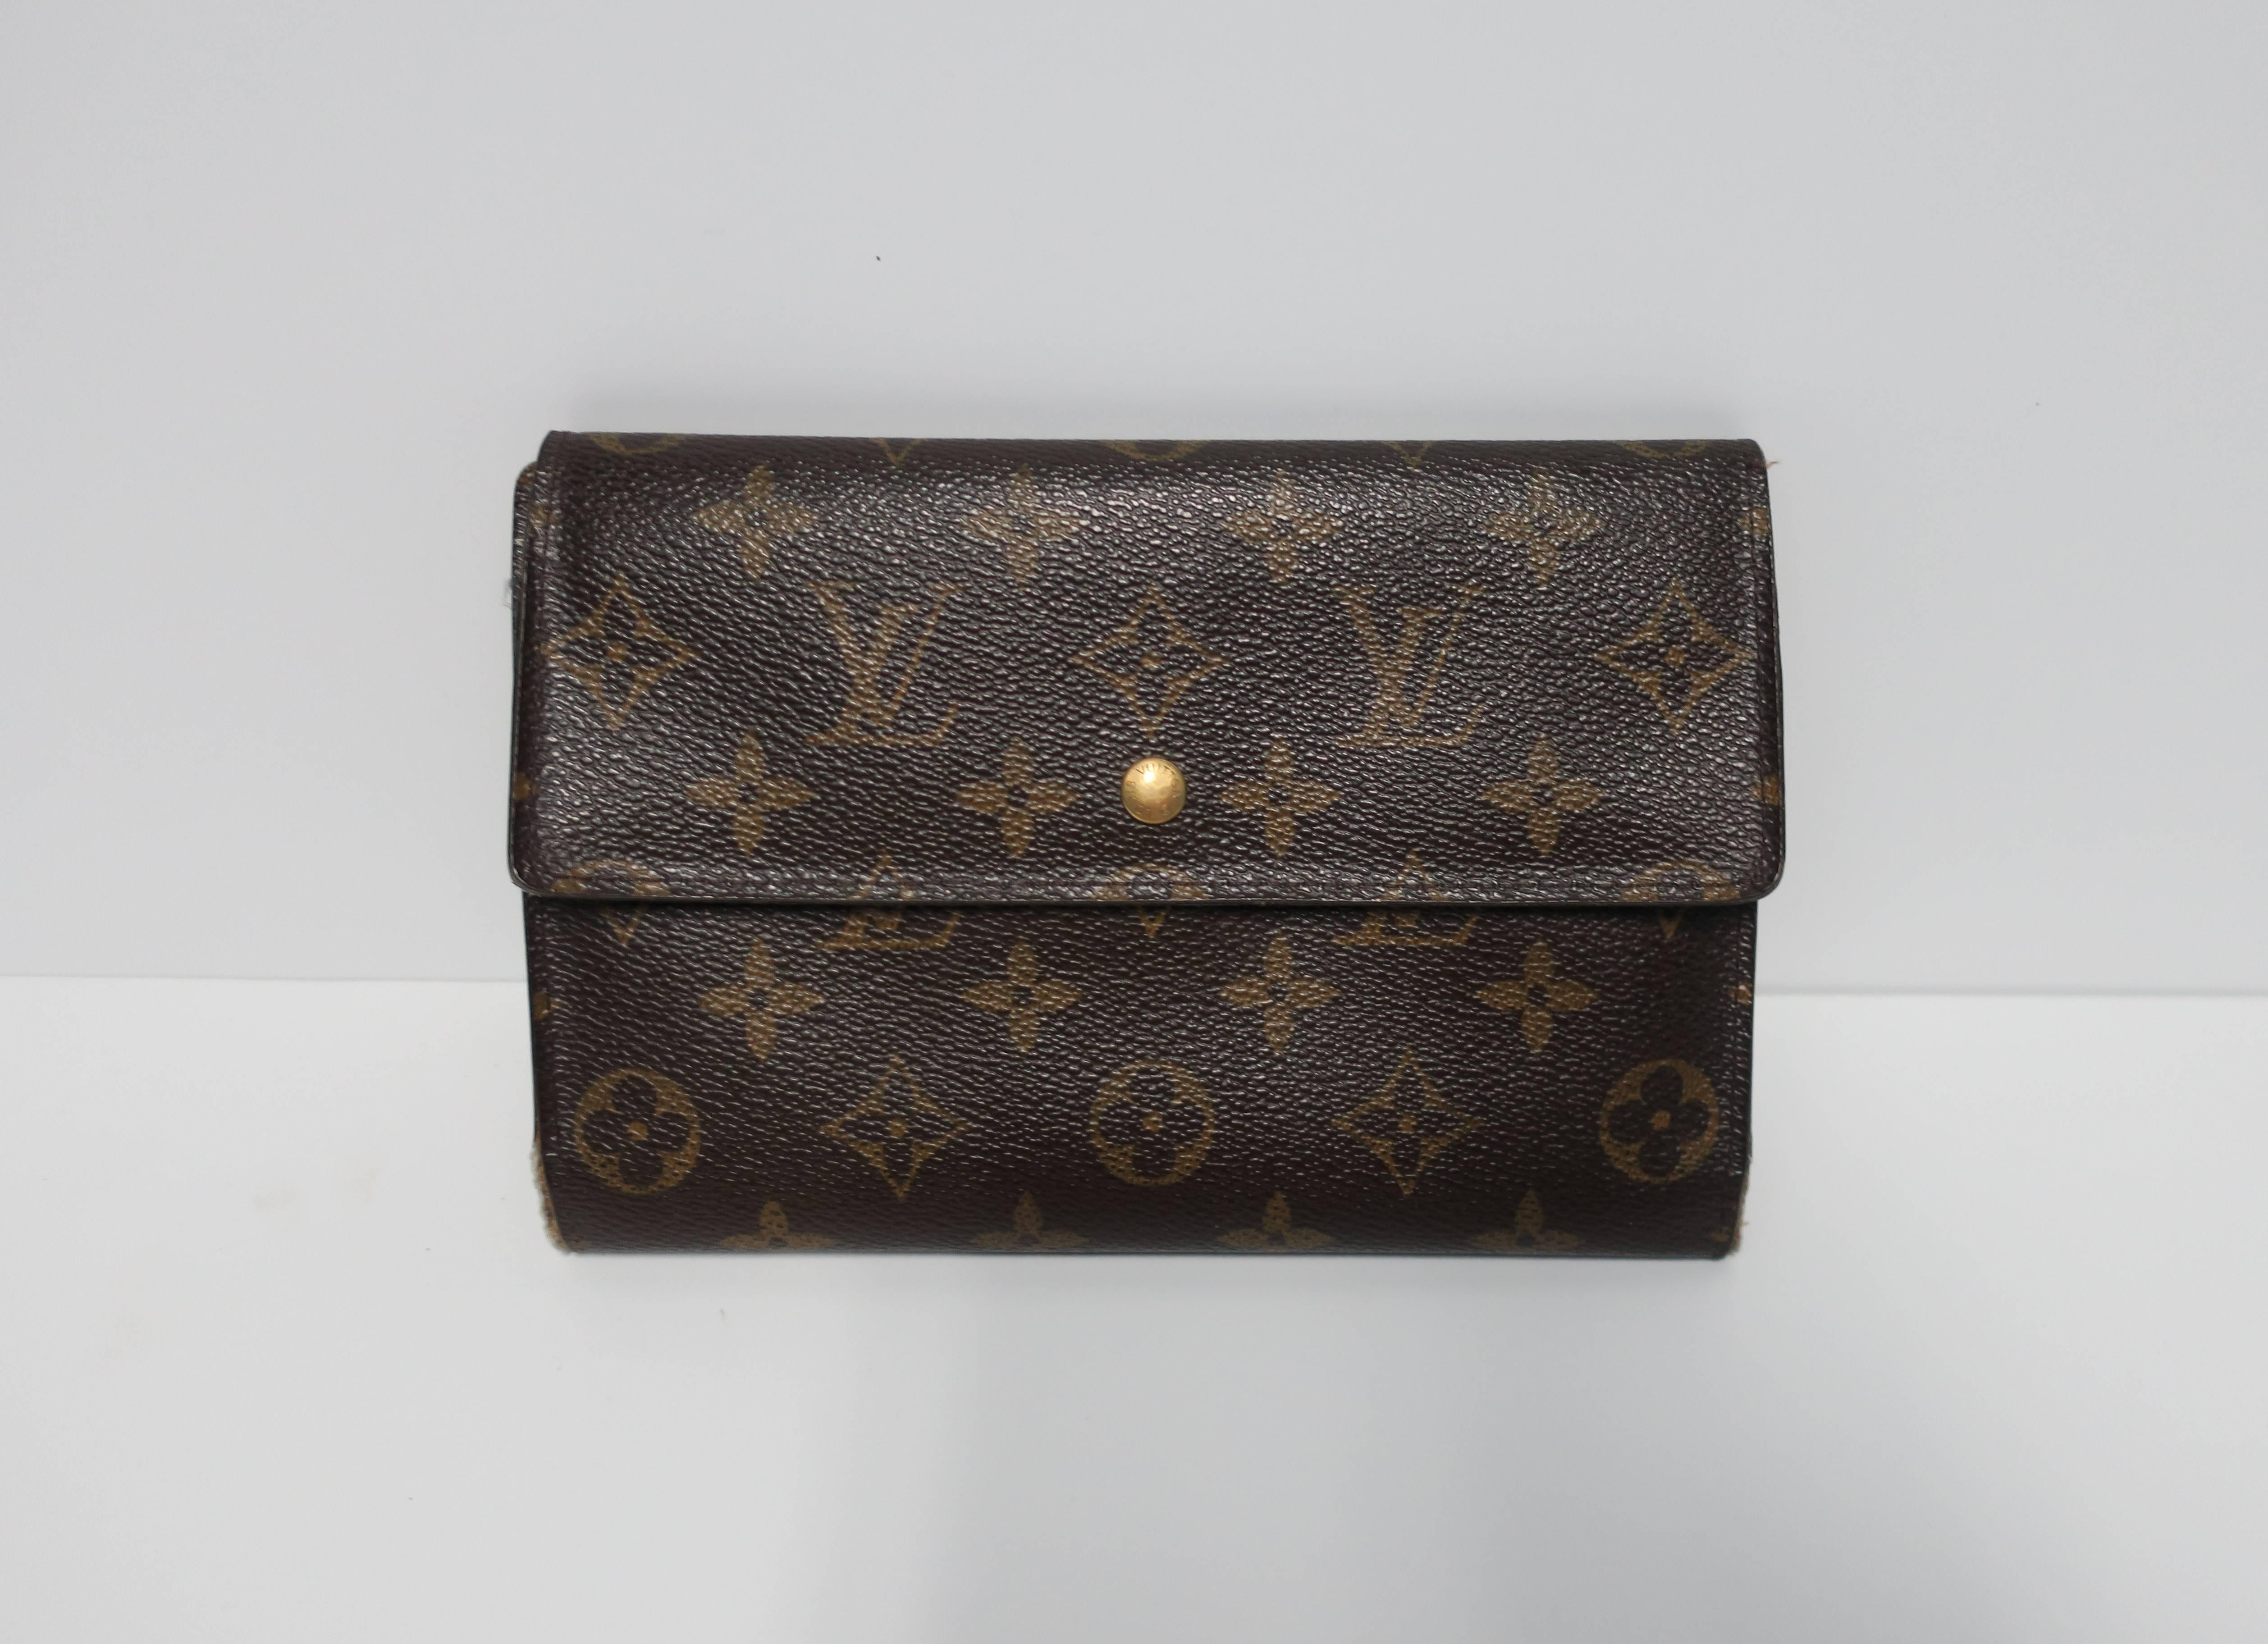 An authentic Louis Vuitton wallet and credit card holder case in the classic, iconic monogrammed canvas pattern and brown cowhide leather, circa 2006. This LV Louis Vuitton wallet features several areas on the inside; wallet for currency, receipts,